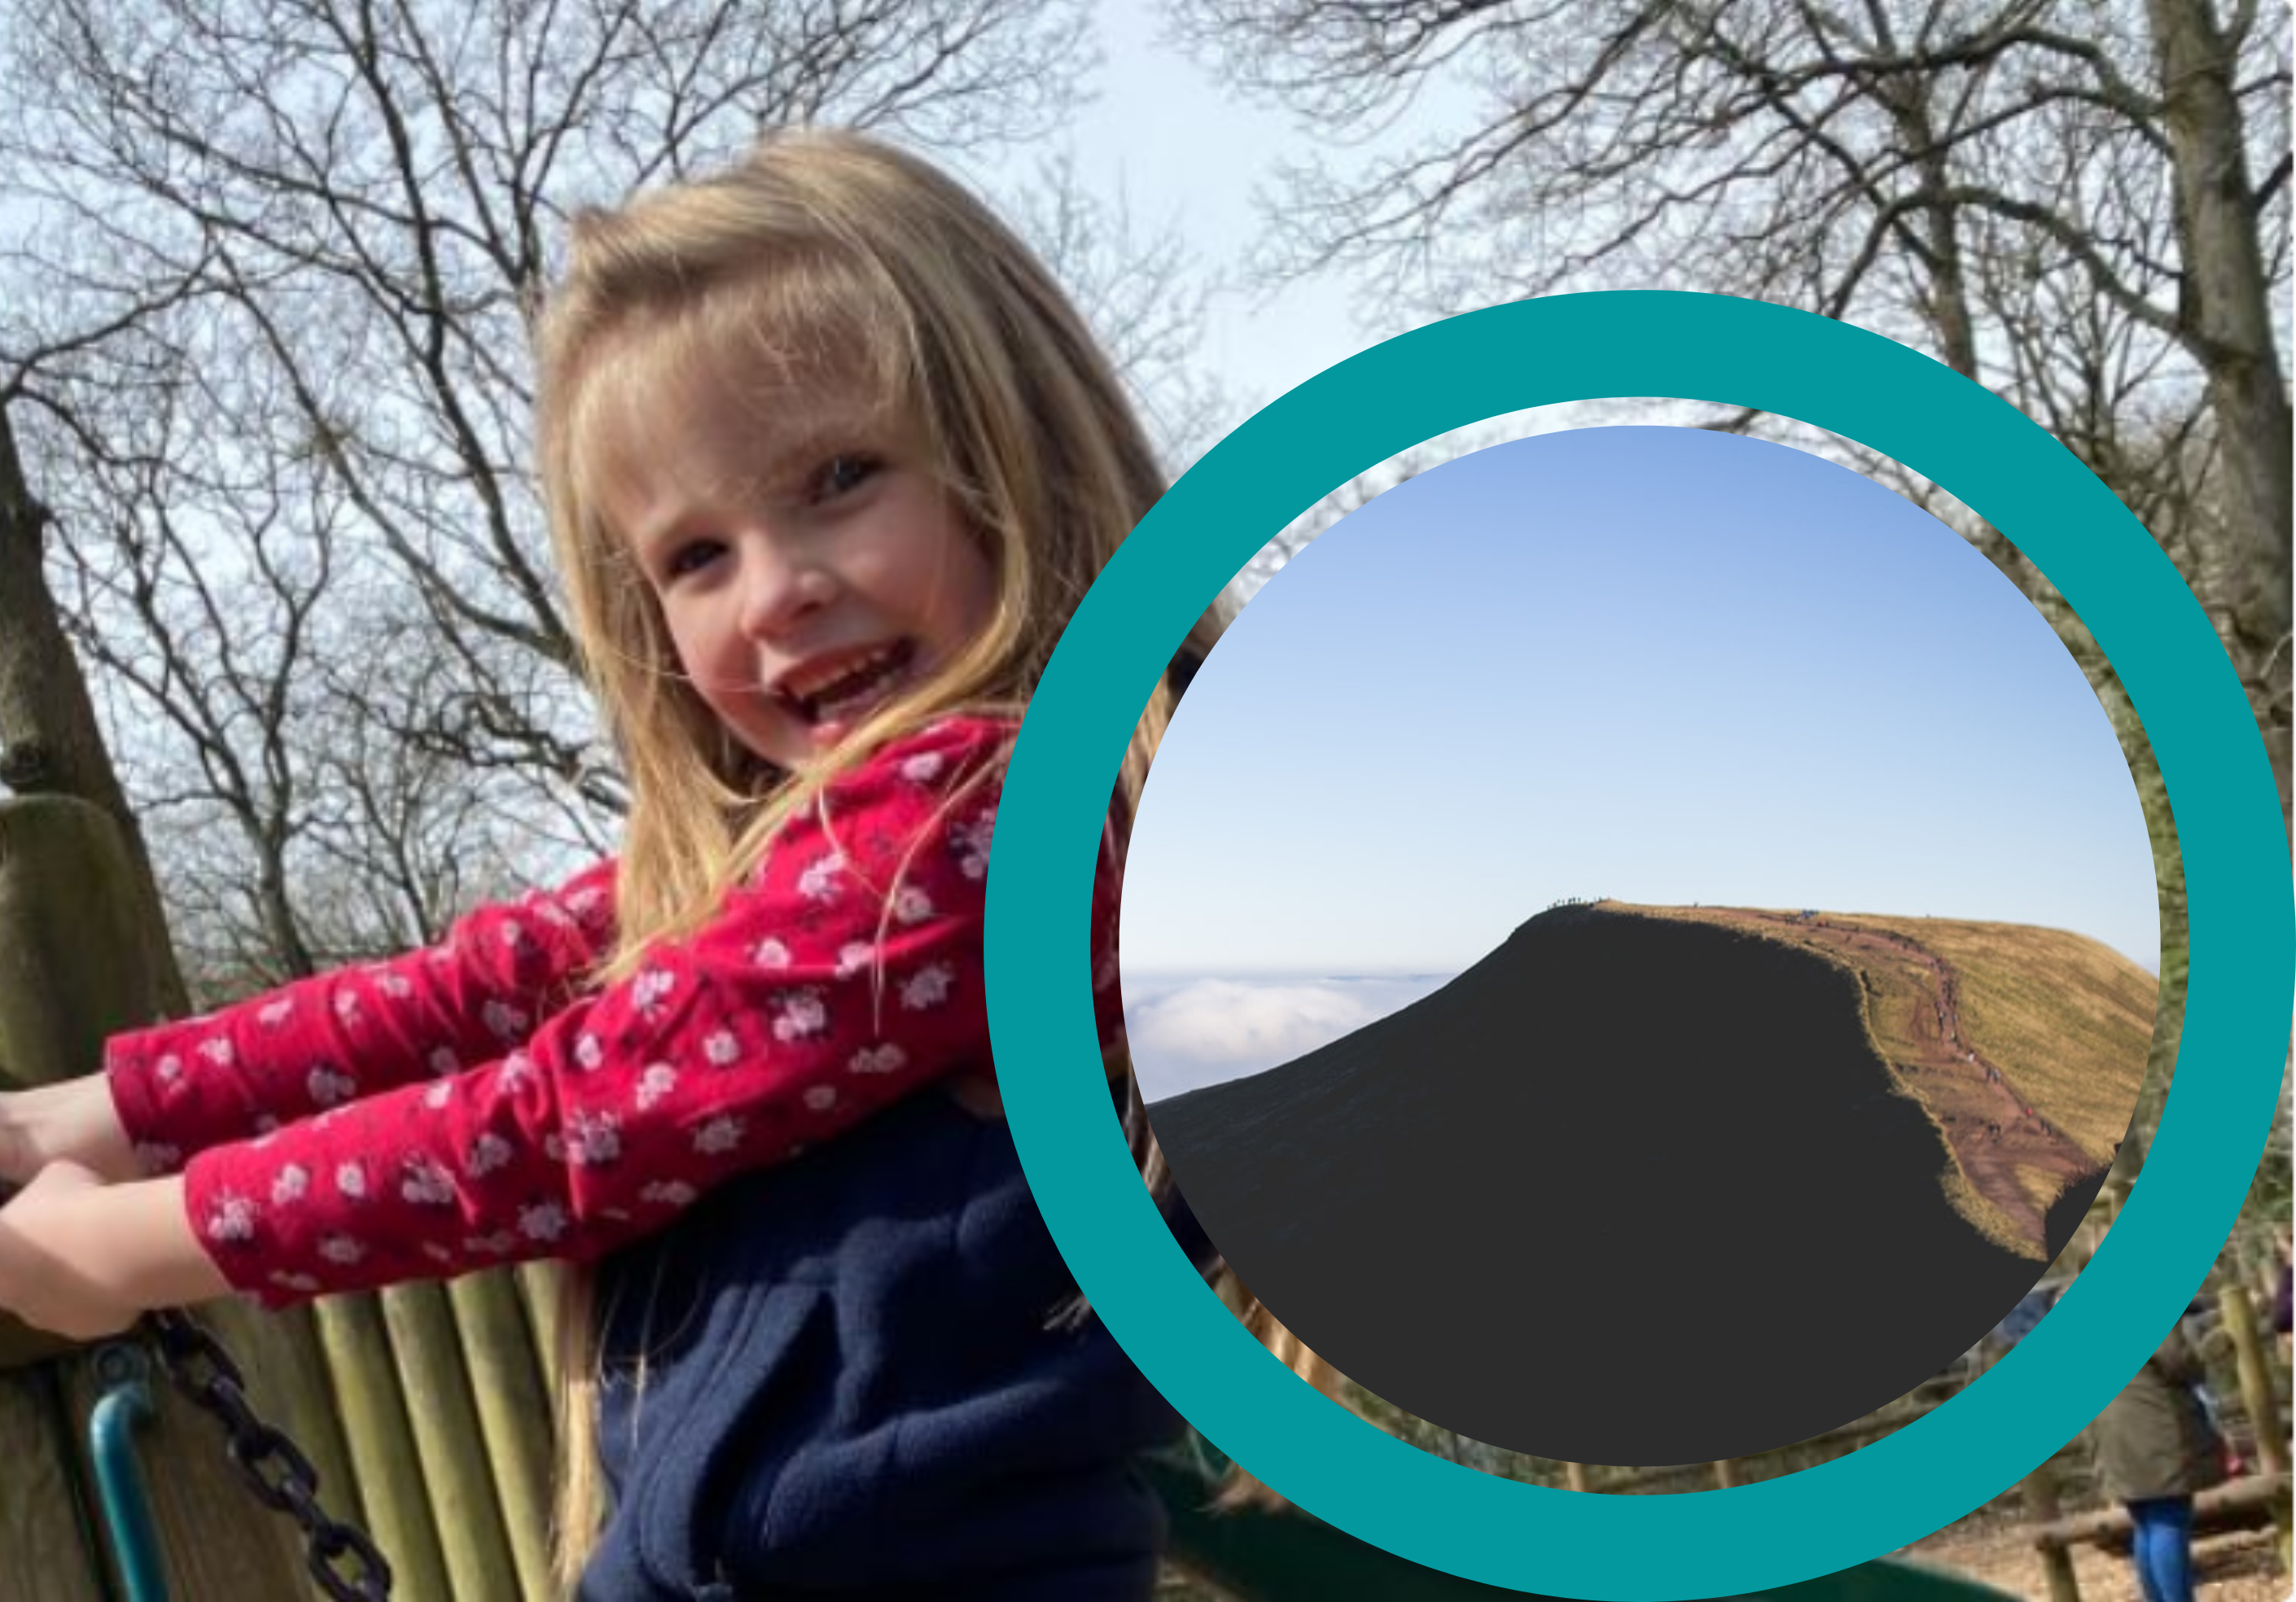 NEWS | 5-year-old Rosa to climb Pen y Fan to raise money to support farmers with mental health issues